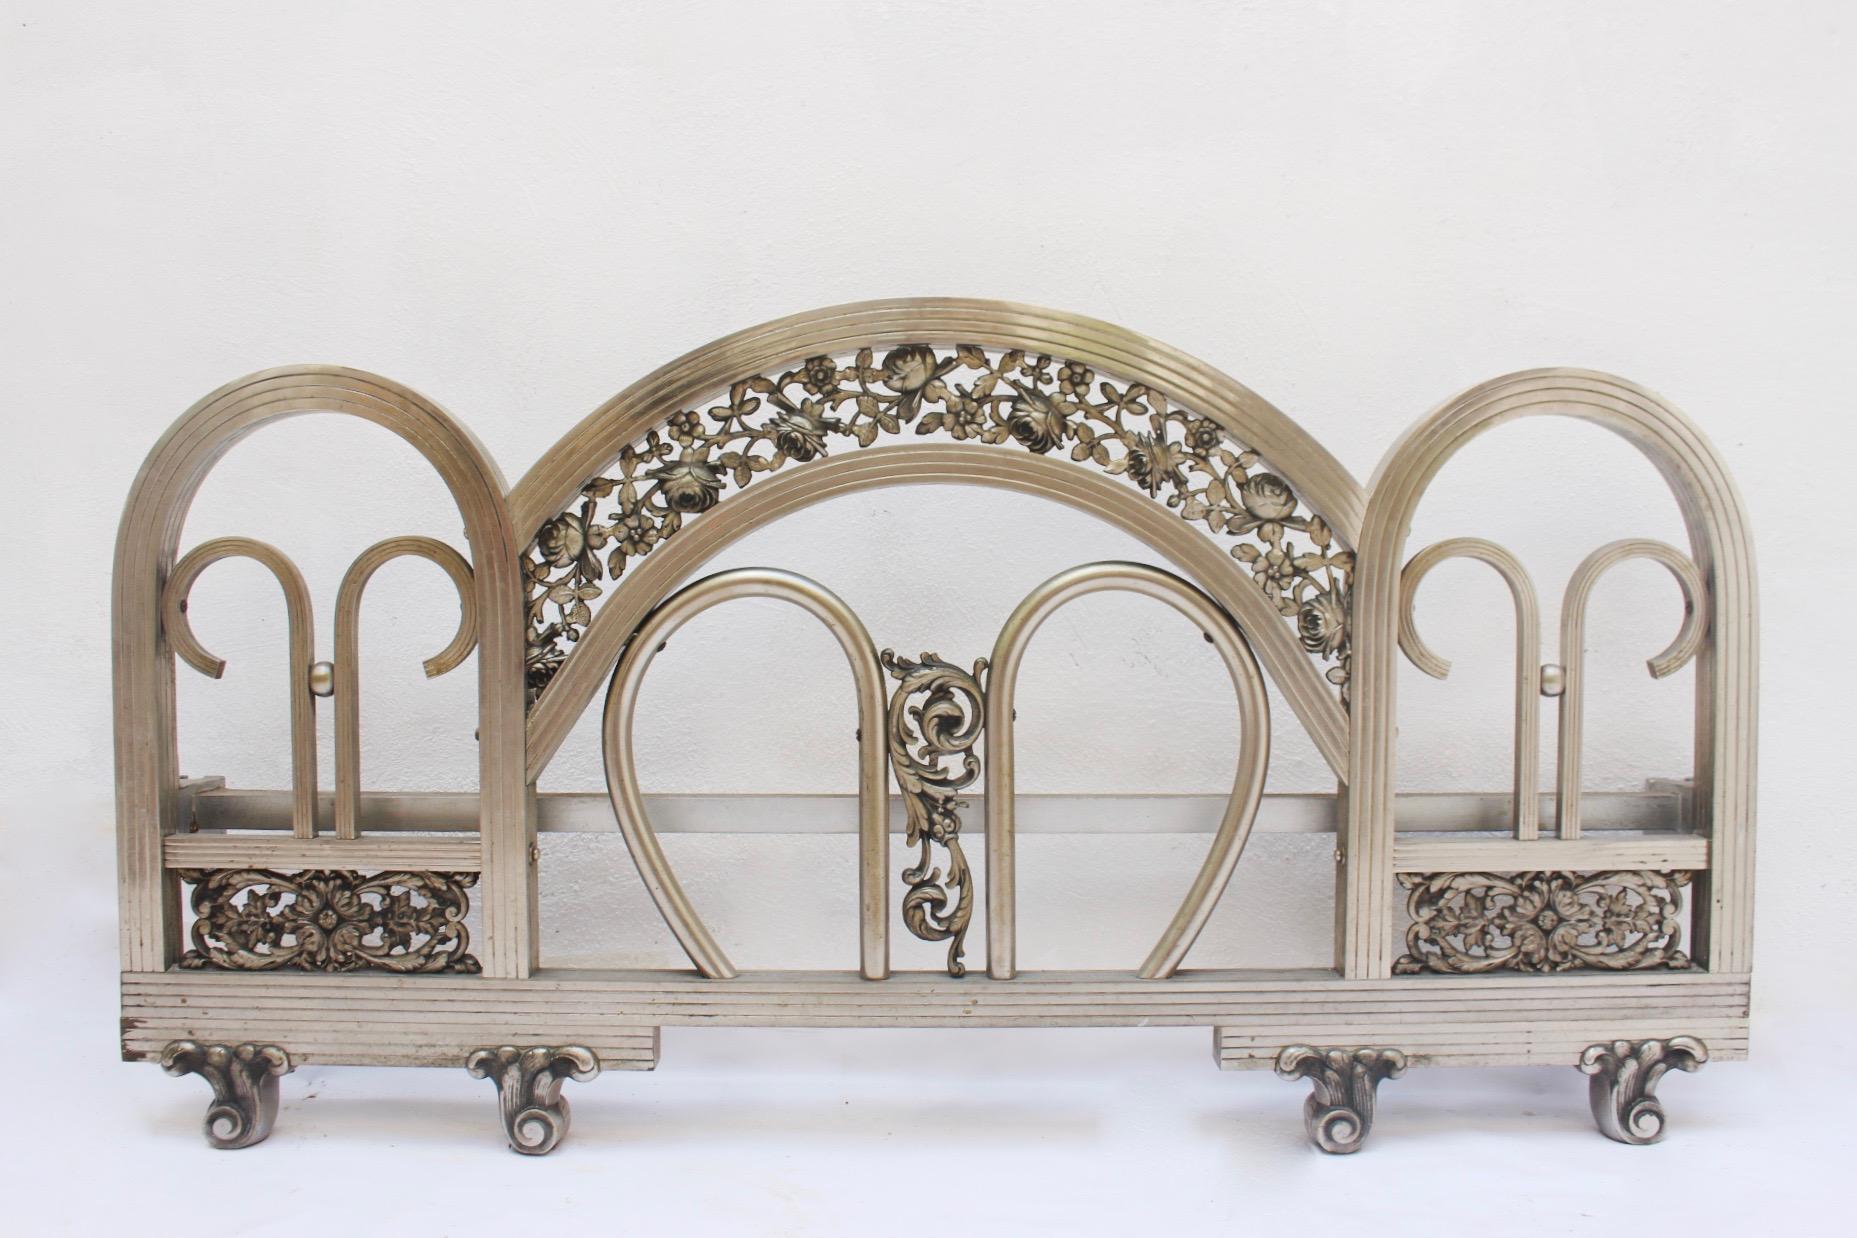 Spanish Art Deco Chrome Double Bed Headboard and Foot Part, 1930s For Sale